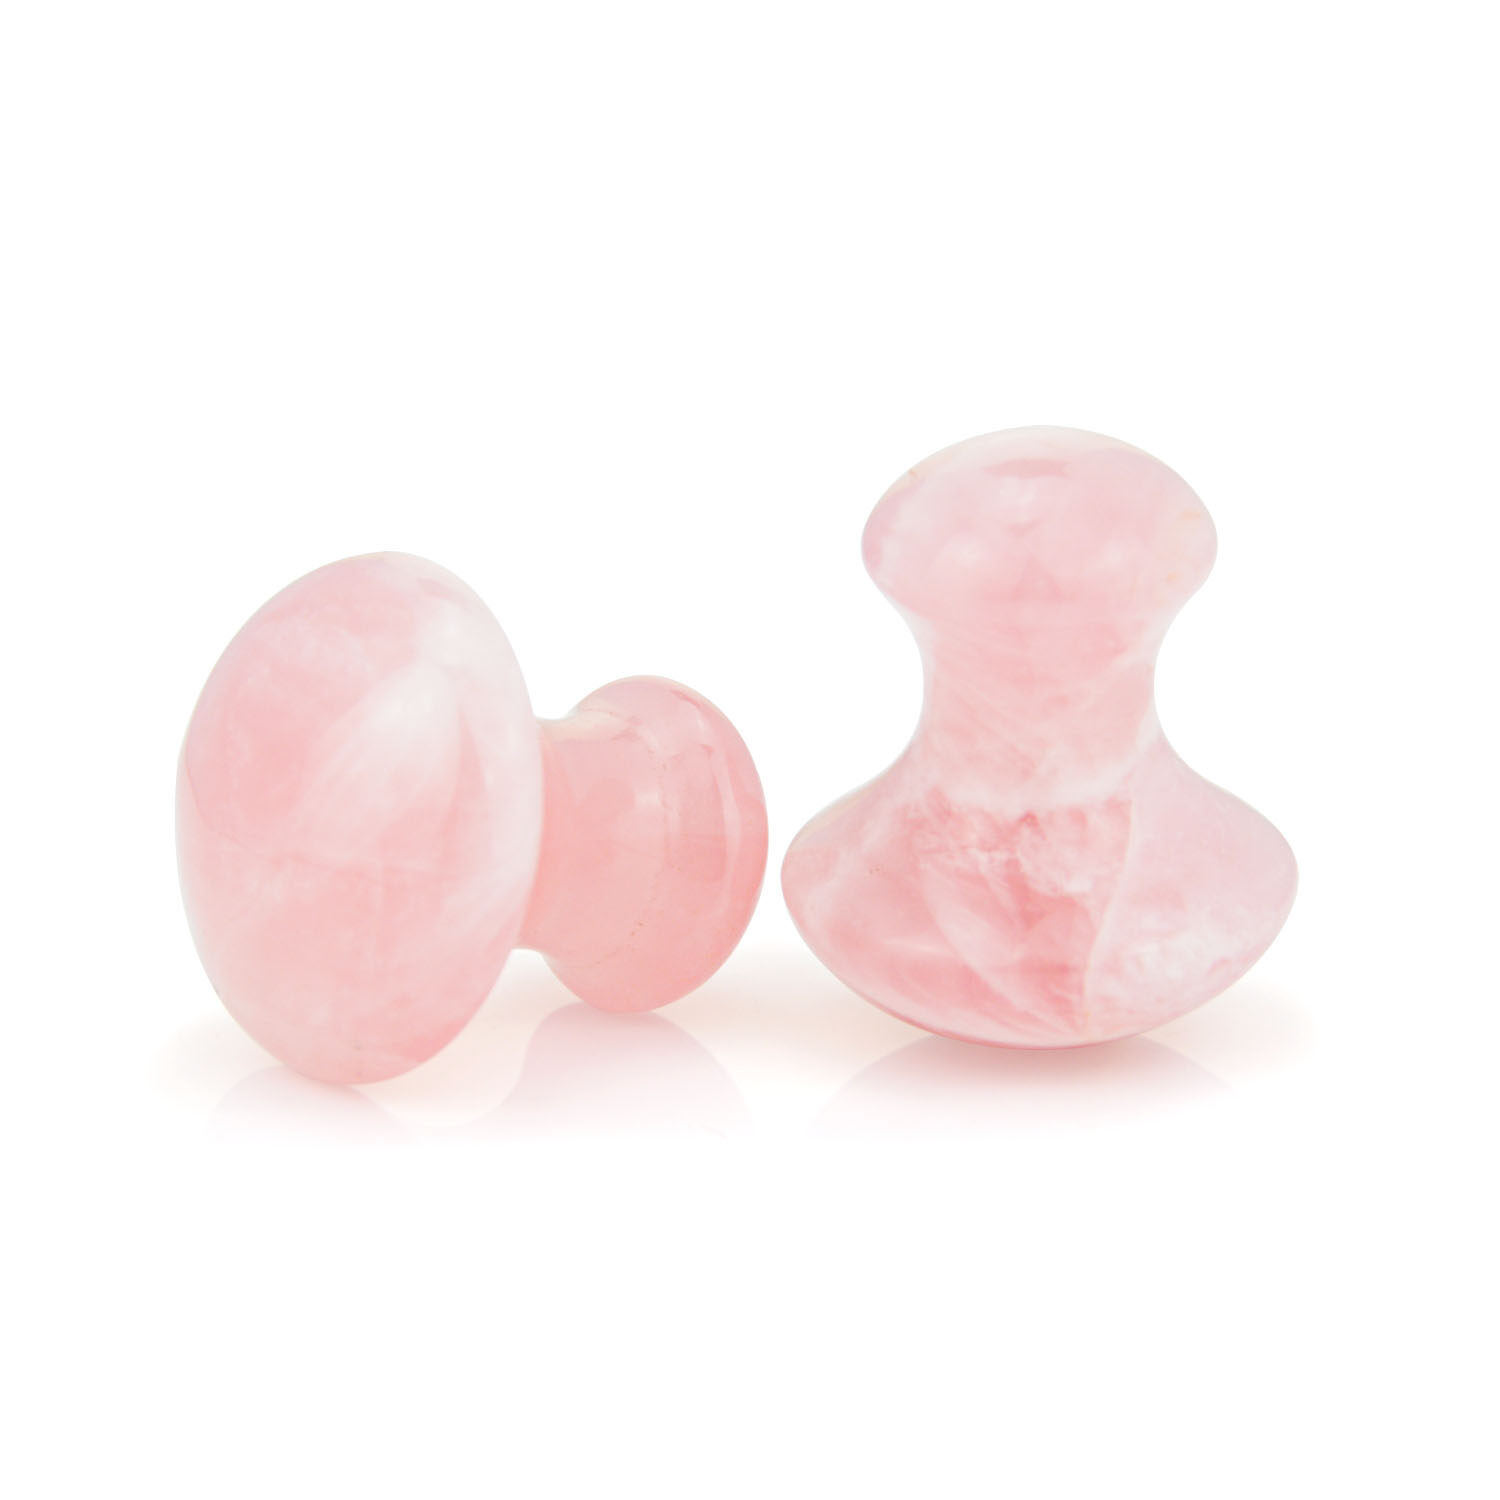 ice roller and gua sha set pink, face ice roller jade and gua sha set, ice face roller and gua sha set pink, ice roller and gua sha and jade roller set